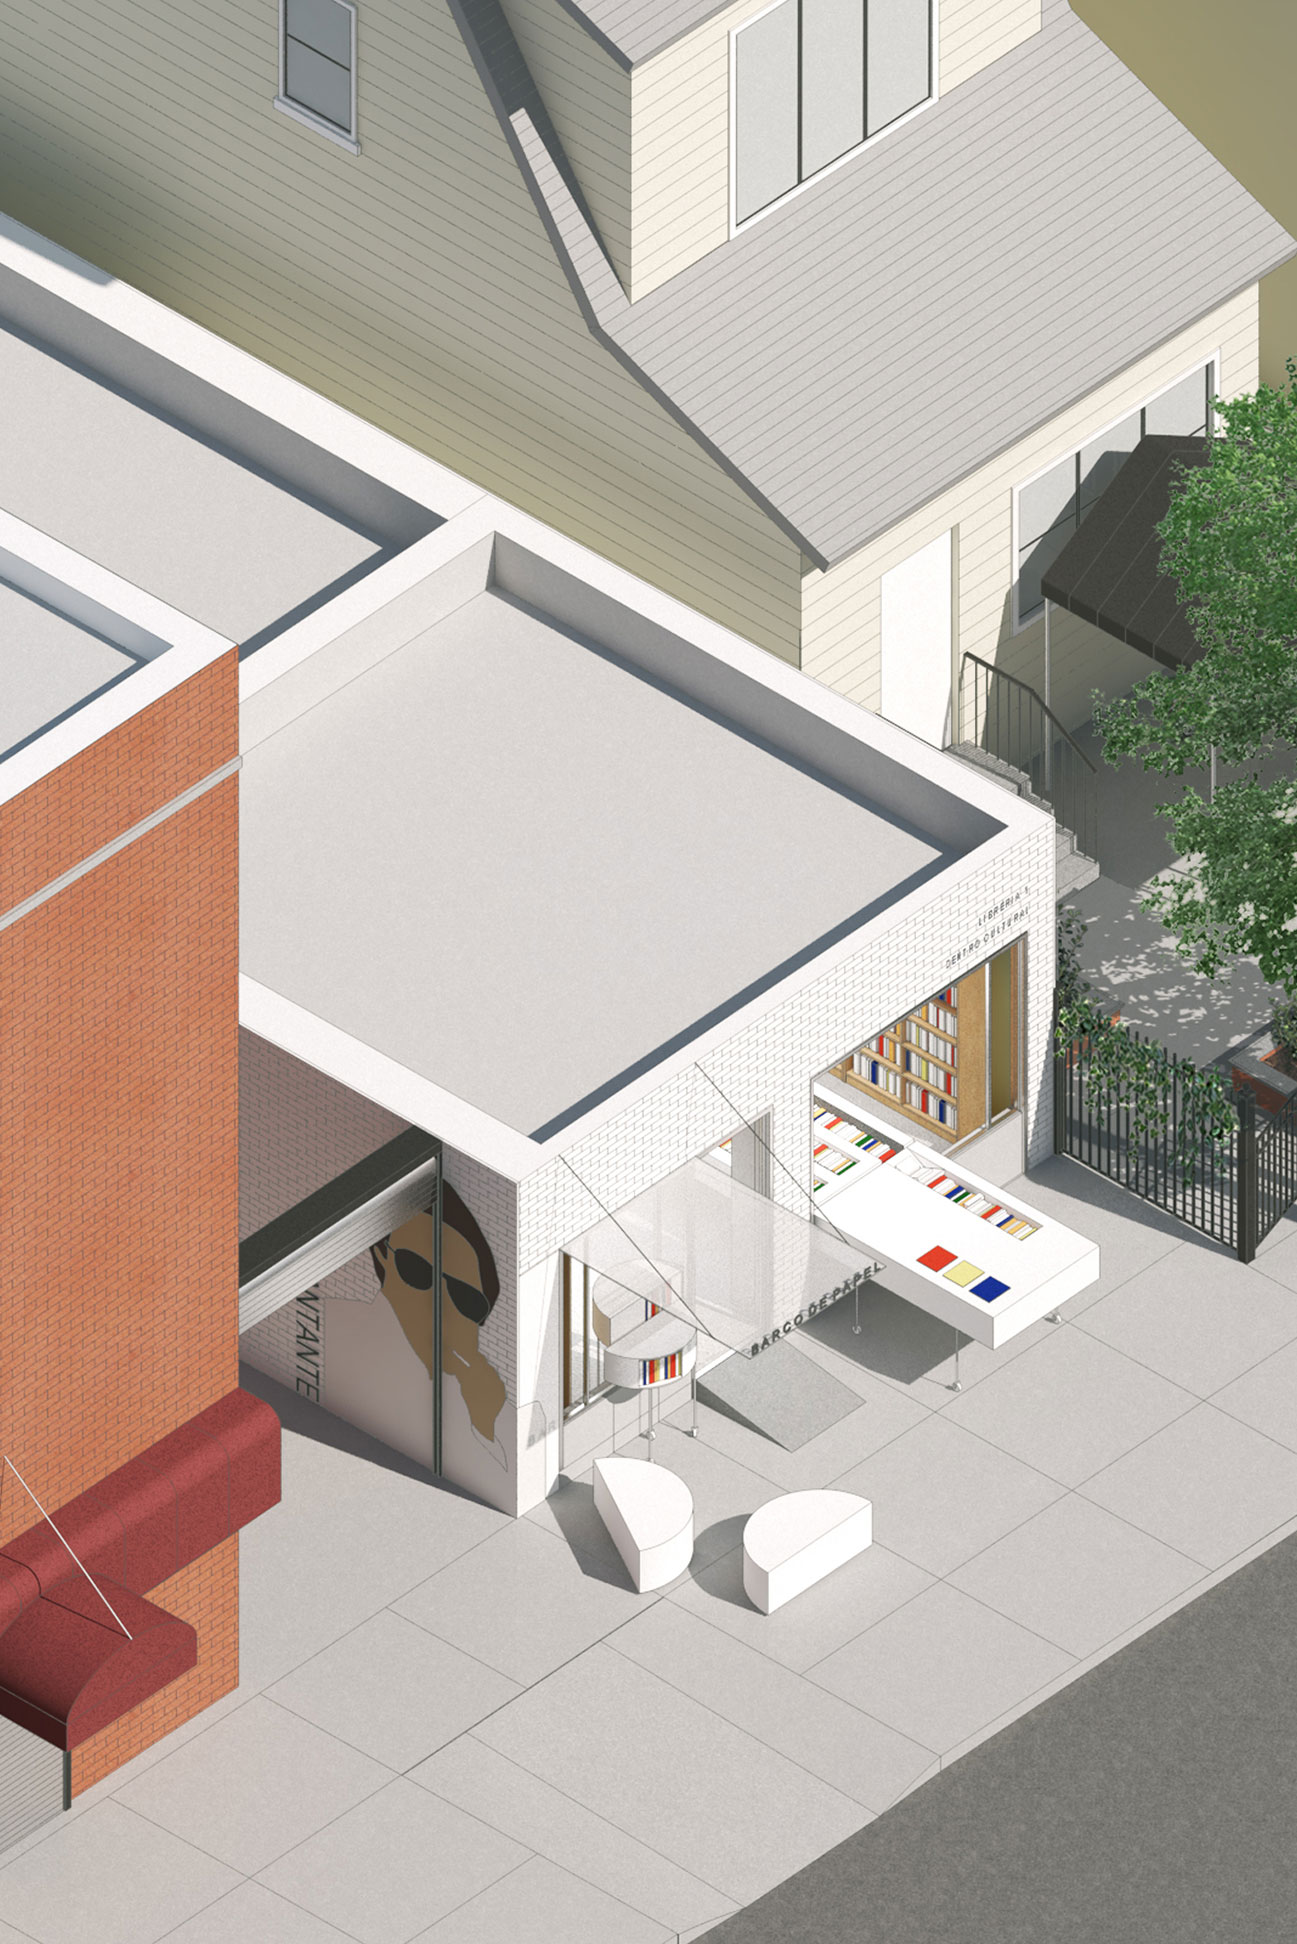 Rendering of a library building with an indoor/outdoor table and front exterior courtyard